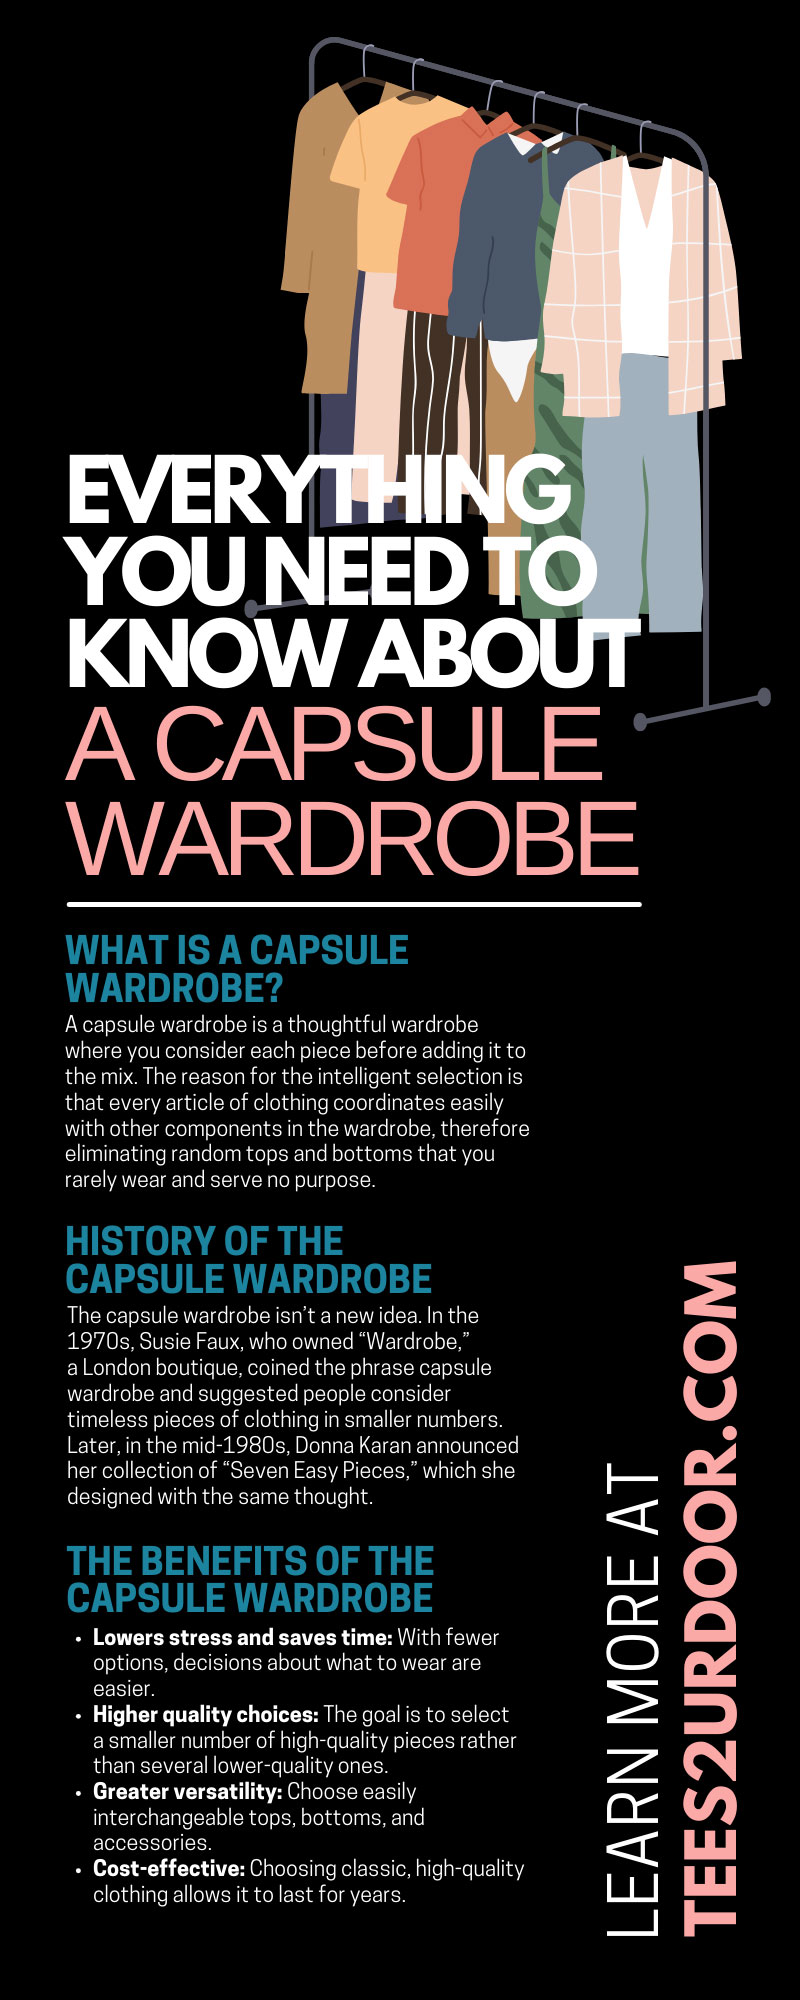 Everything You Need To Know About a Capsule Wardrobe